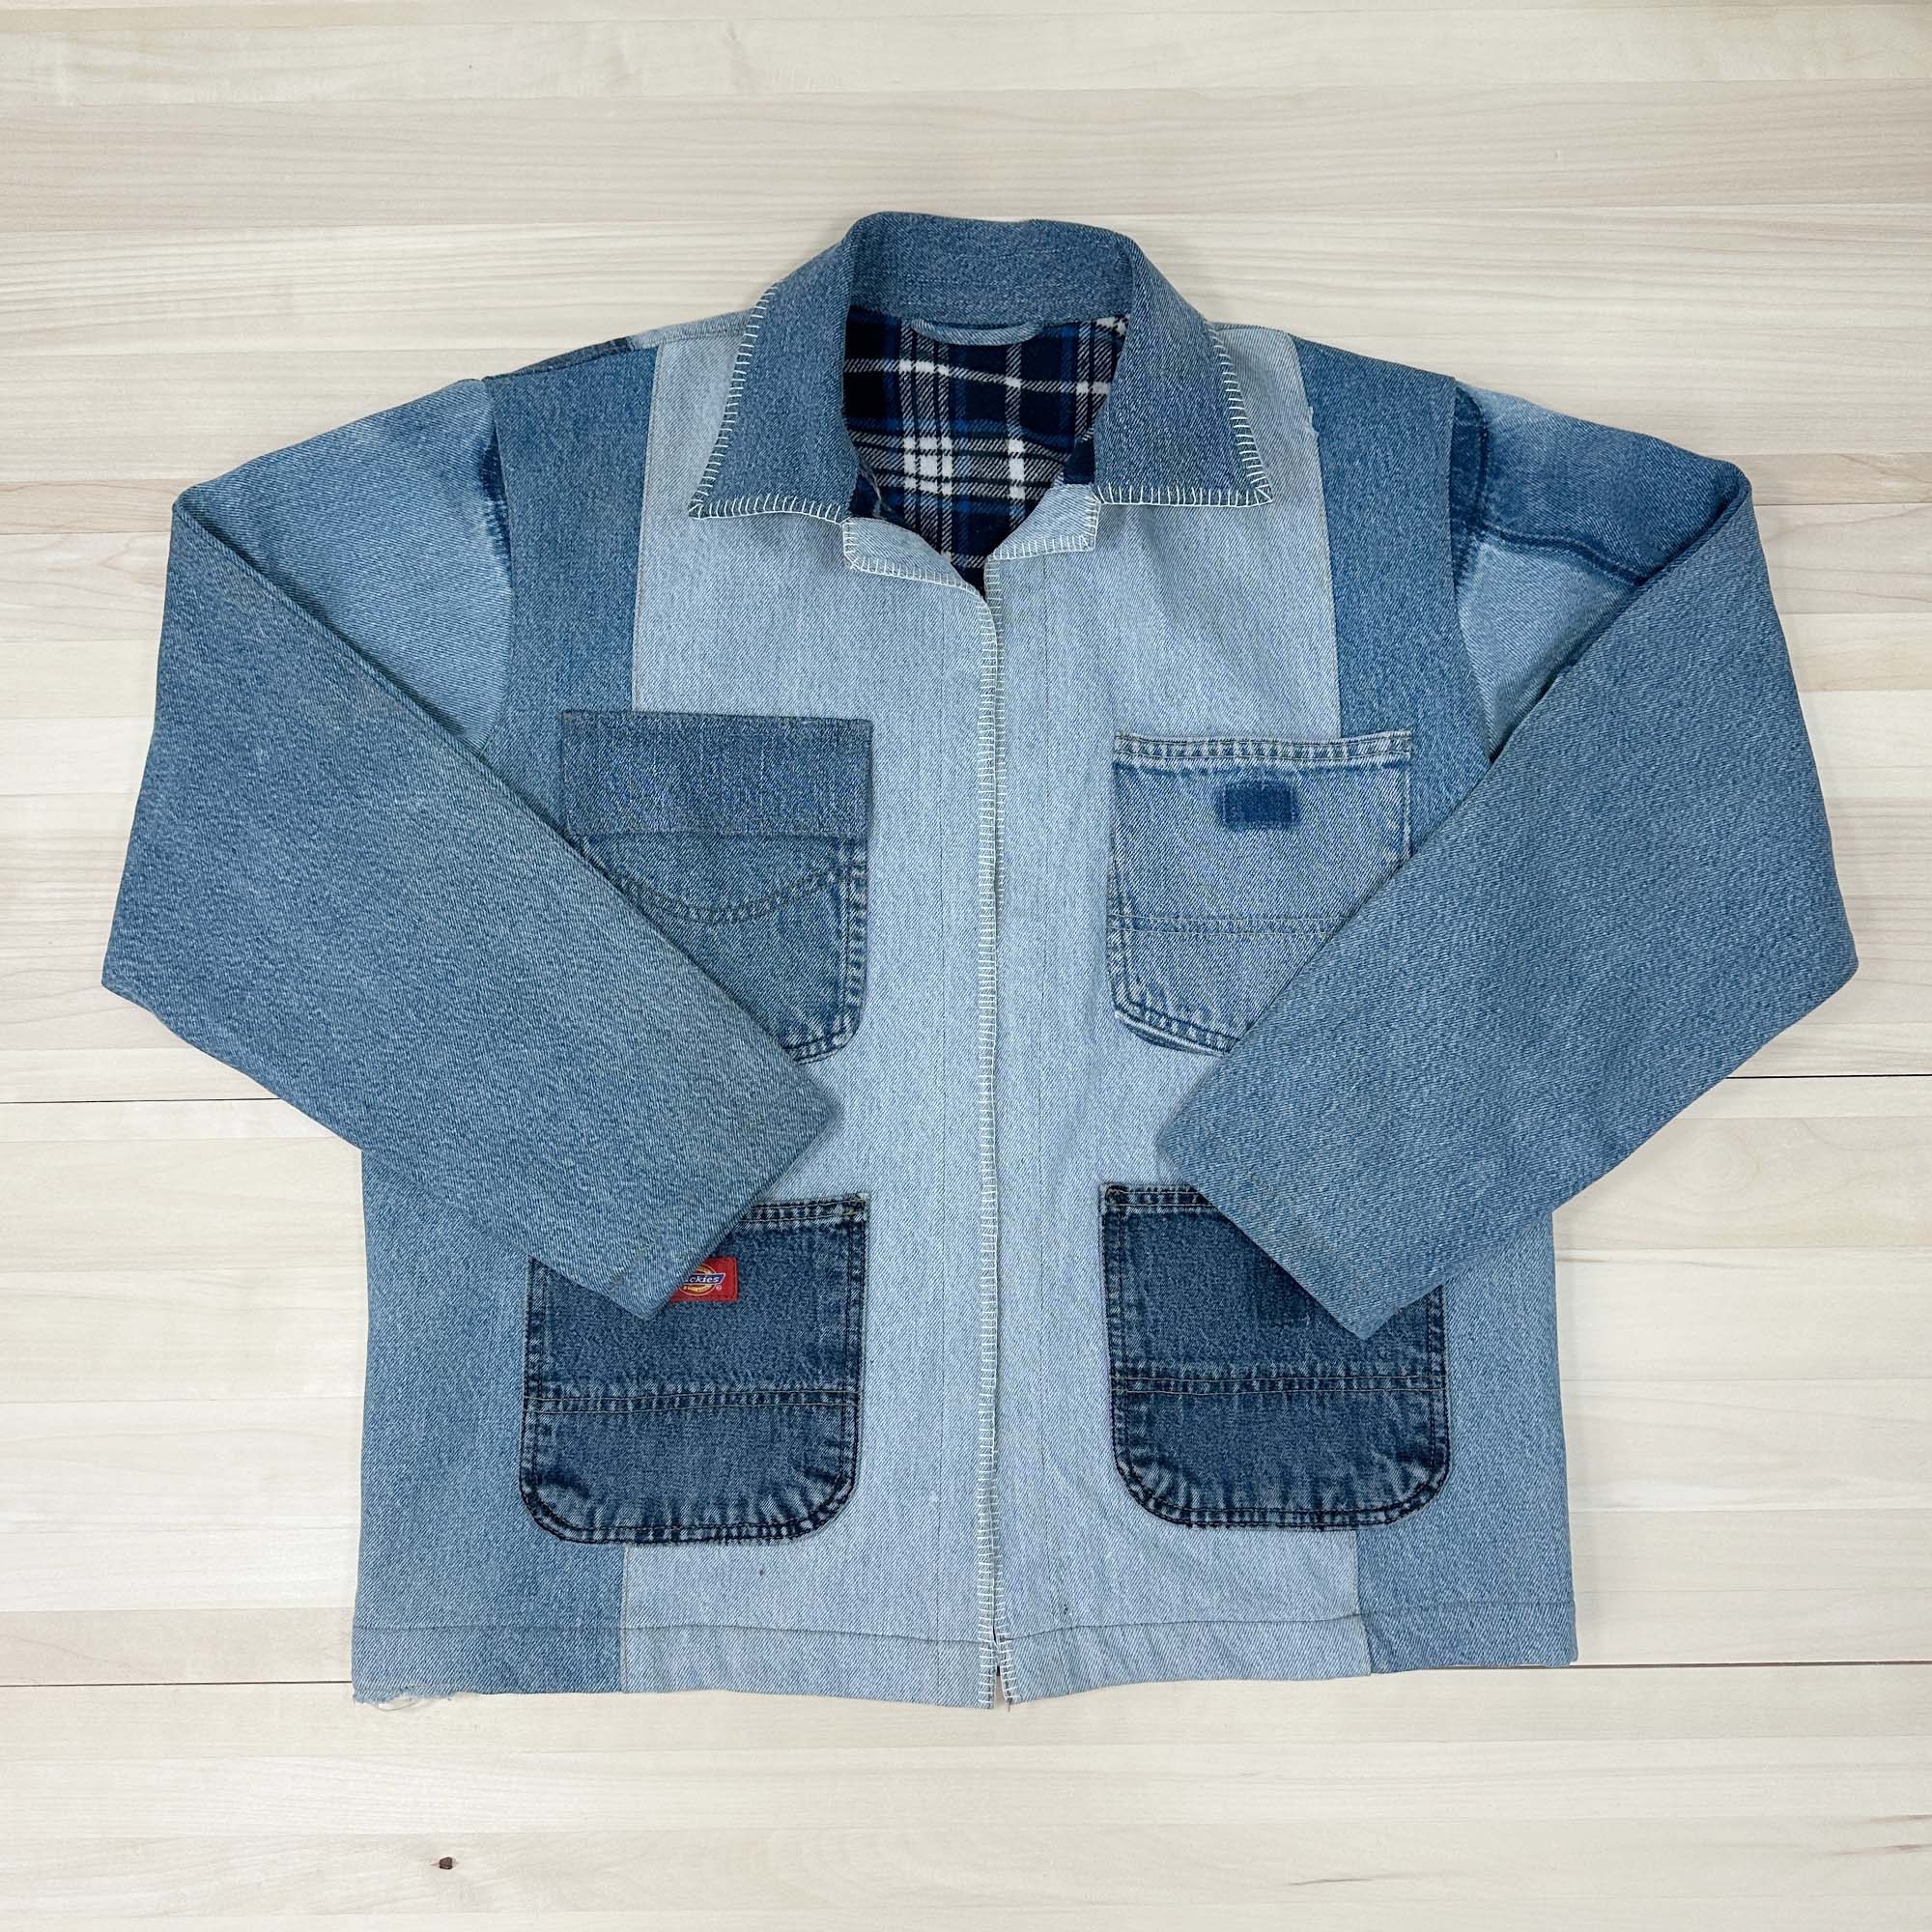 Chore Coat Made From Recycled Work Jeans - Large